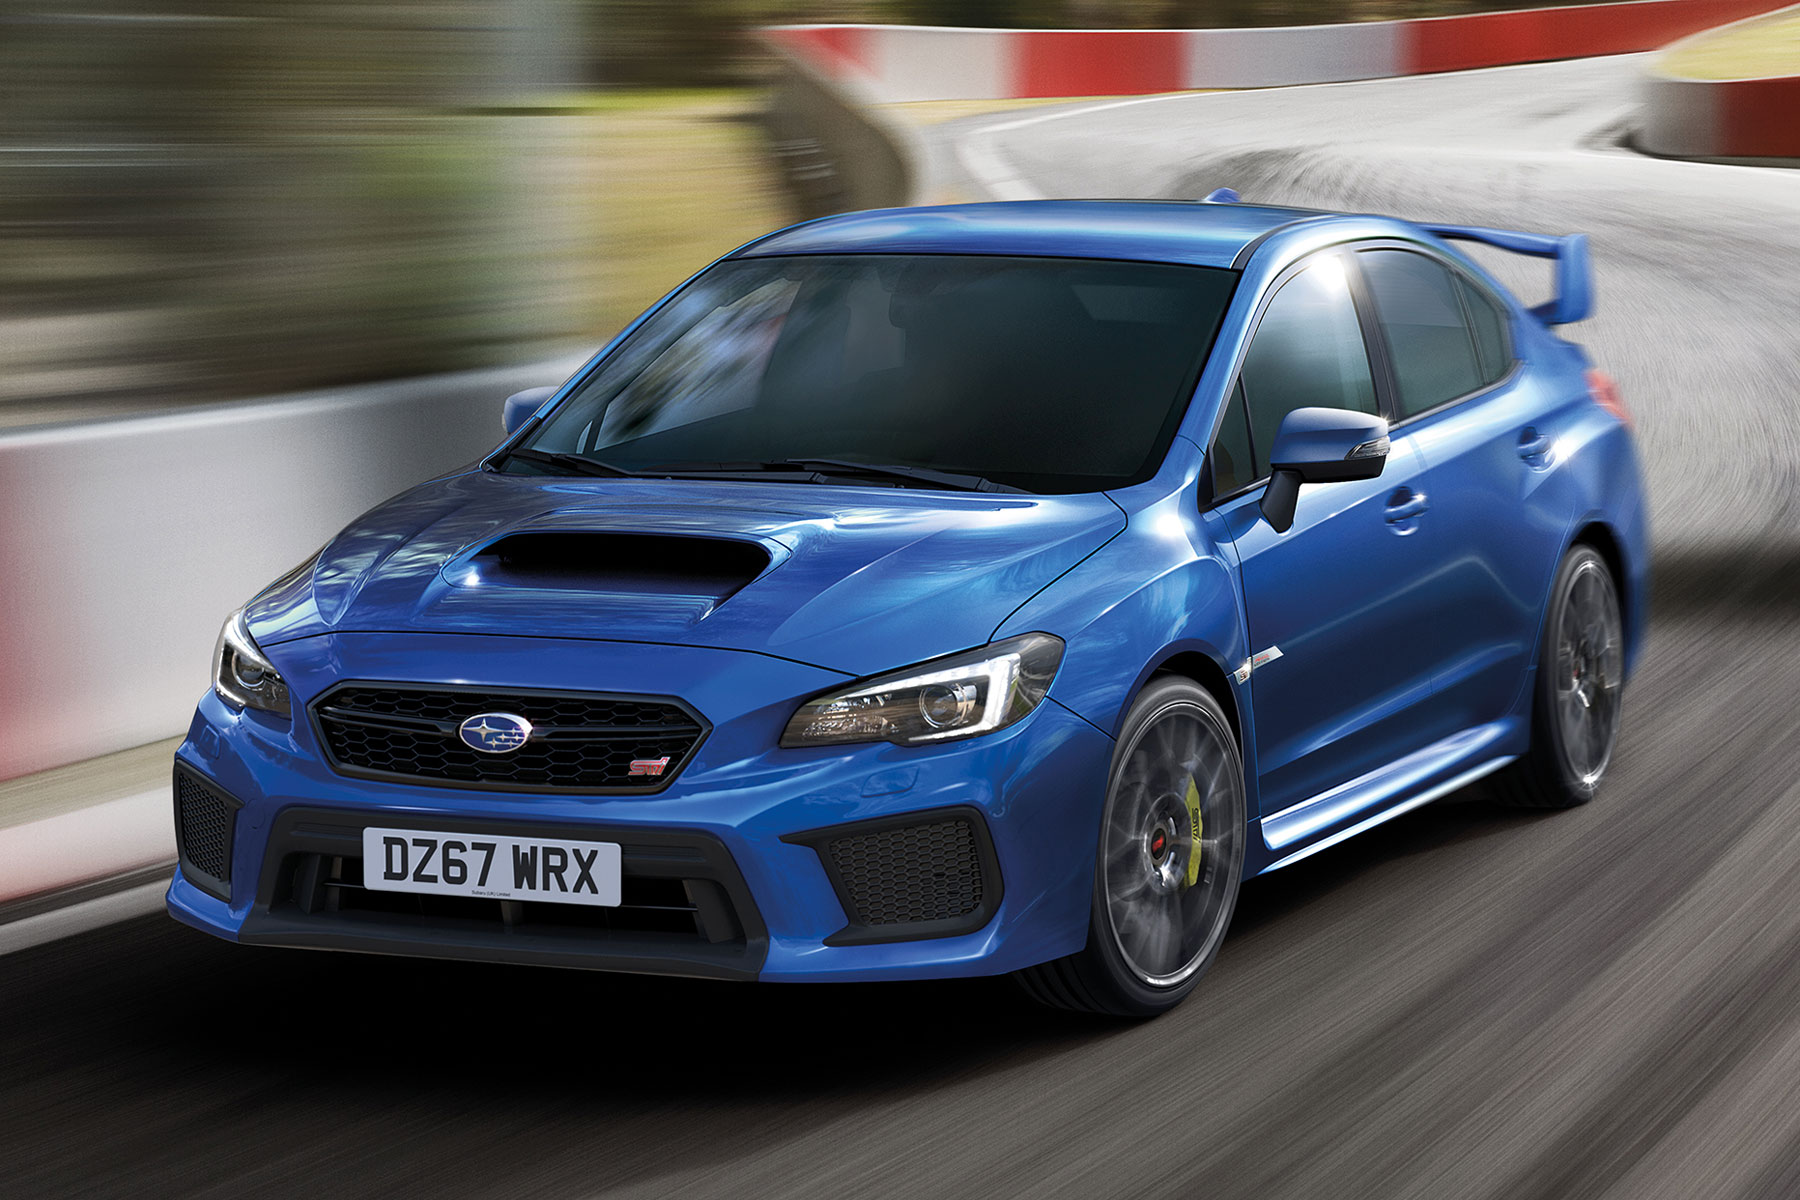 This is your last chance to buy a new Subaru WRX STi in the UK